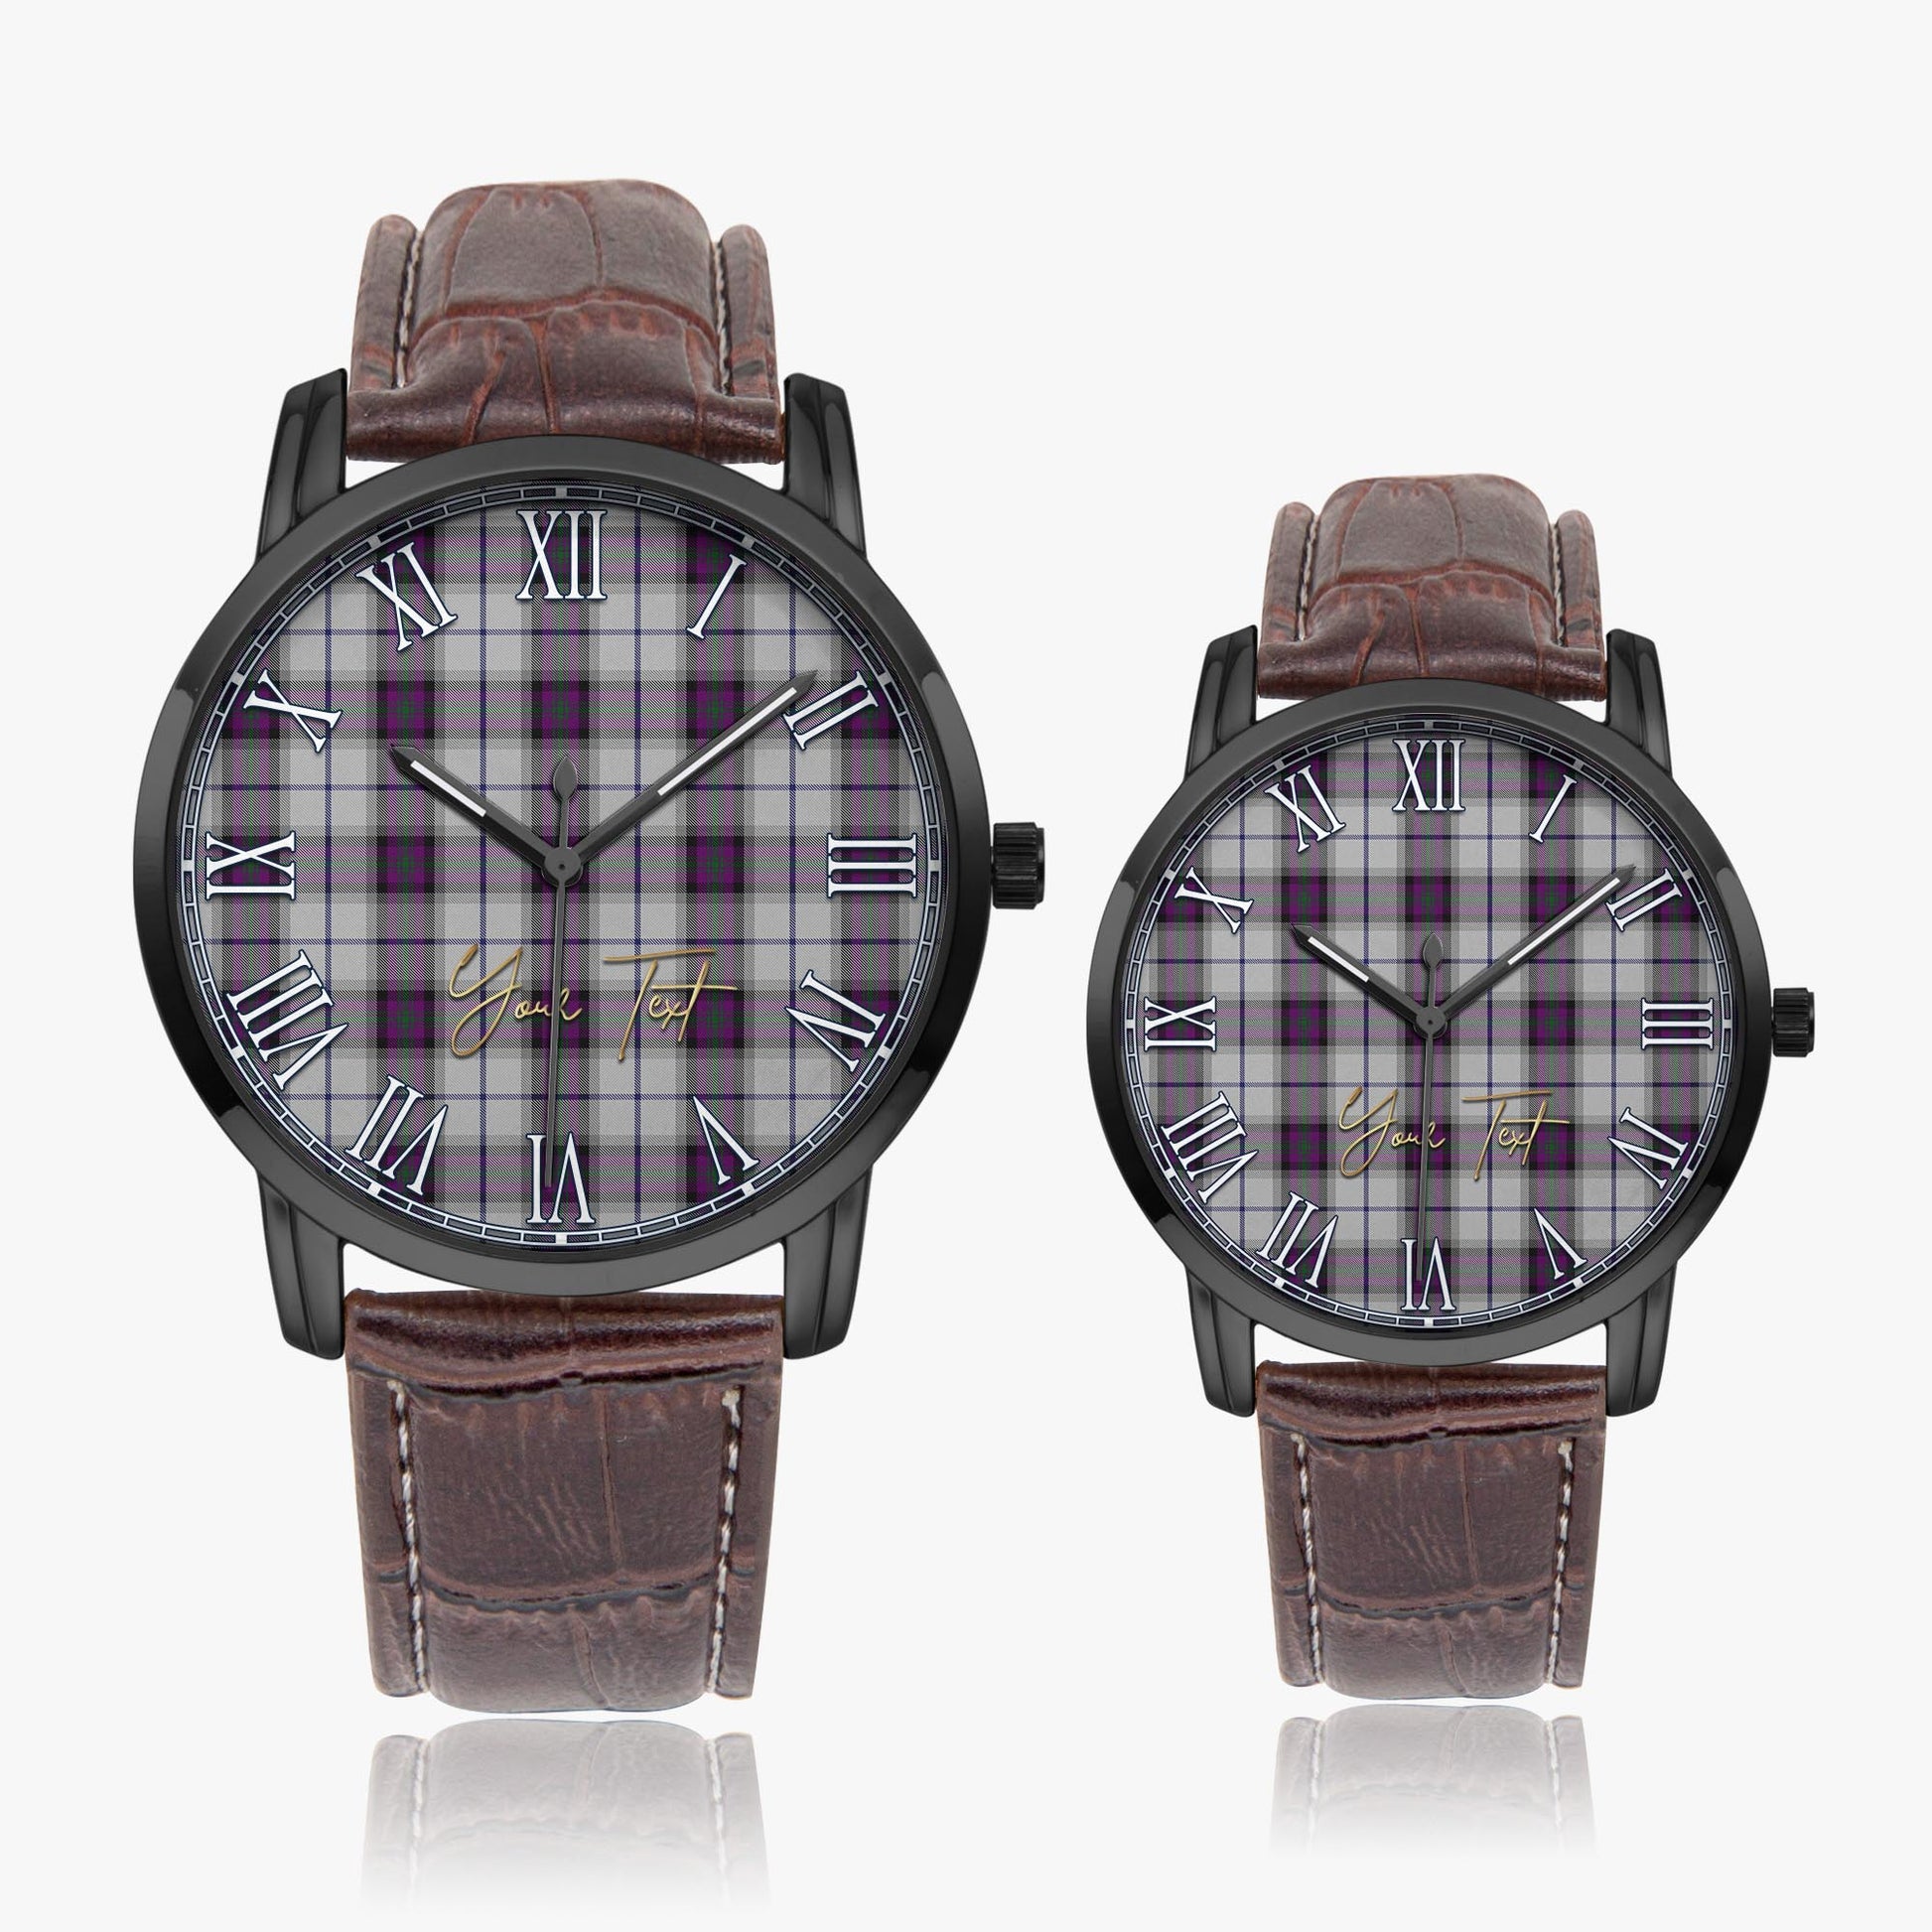 Alexander of Menstry Dress Tartan Personalized Your Text Leather Trap Quartz Watch Wide Type Black Case With Brown Leather Strap - Tartanvibesclothing